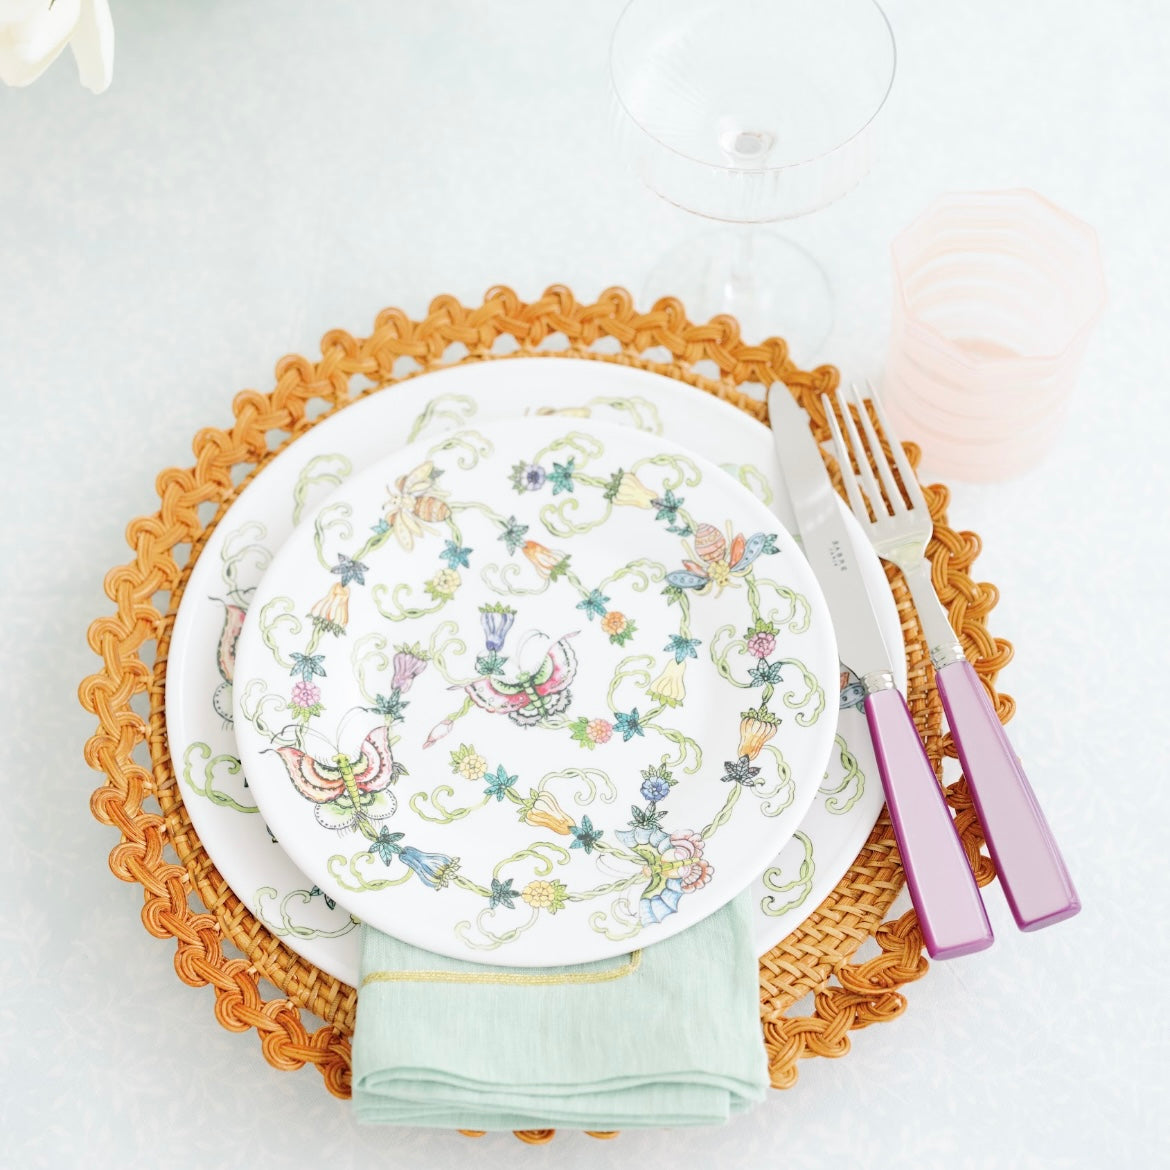 GARDEN PARTY SALAD PLATES (SET OF 4)